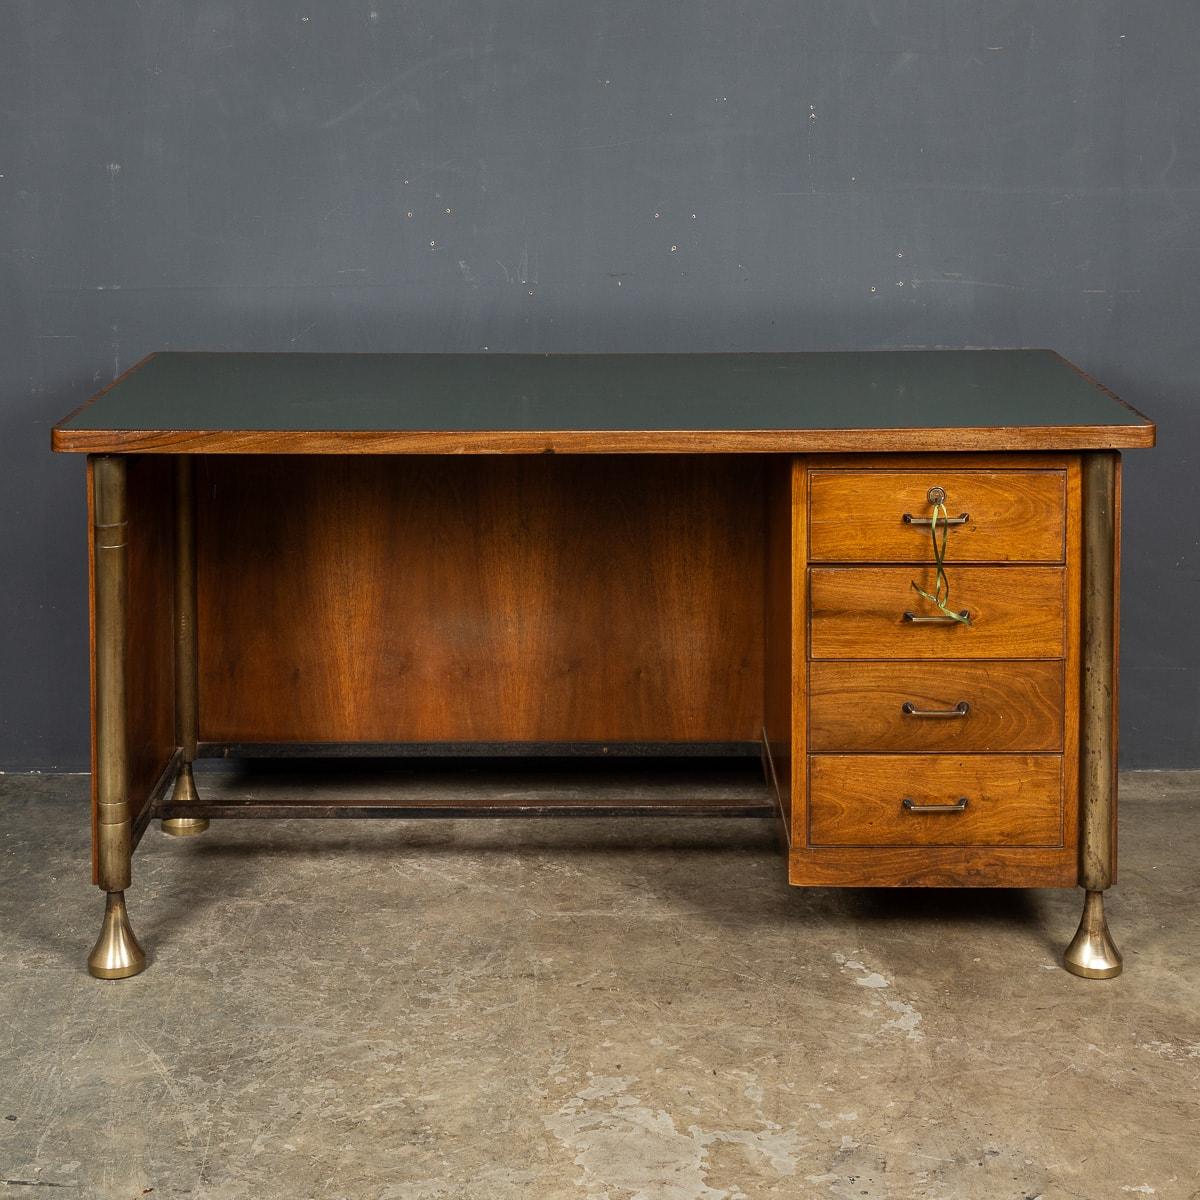 A rare and unusual early 20th Century Italian art deco desk, finished in a light mahogany with simple solid brass legs, brass handles on the four drawers and comes included with the original lock and key for the top drawer. The desk top comes in the